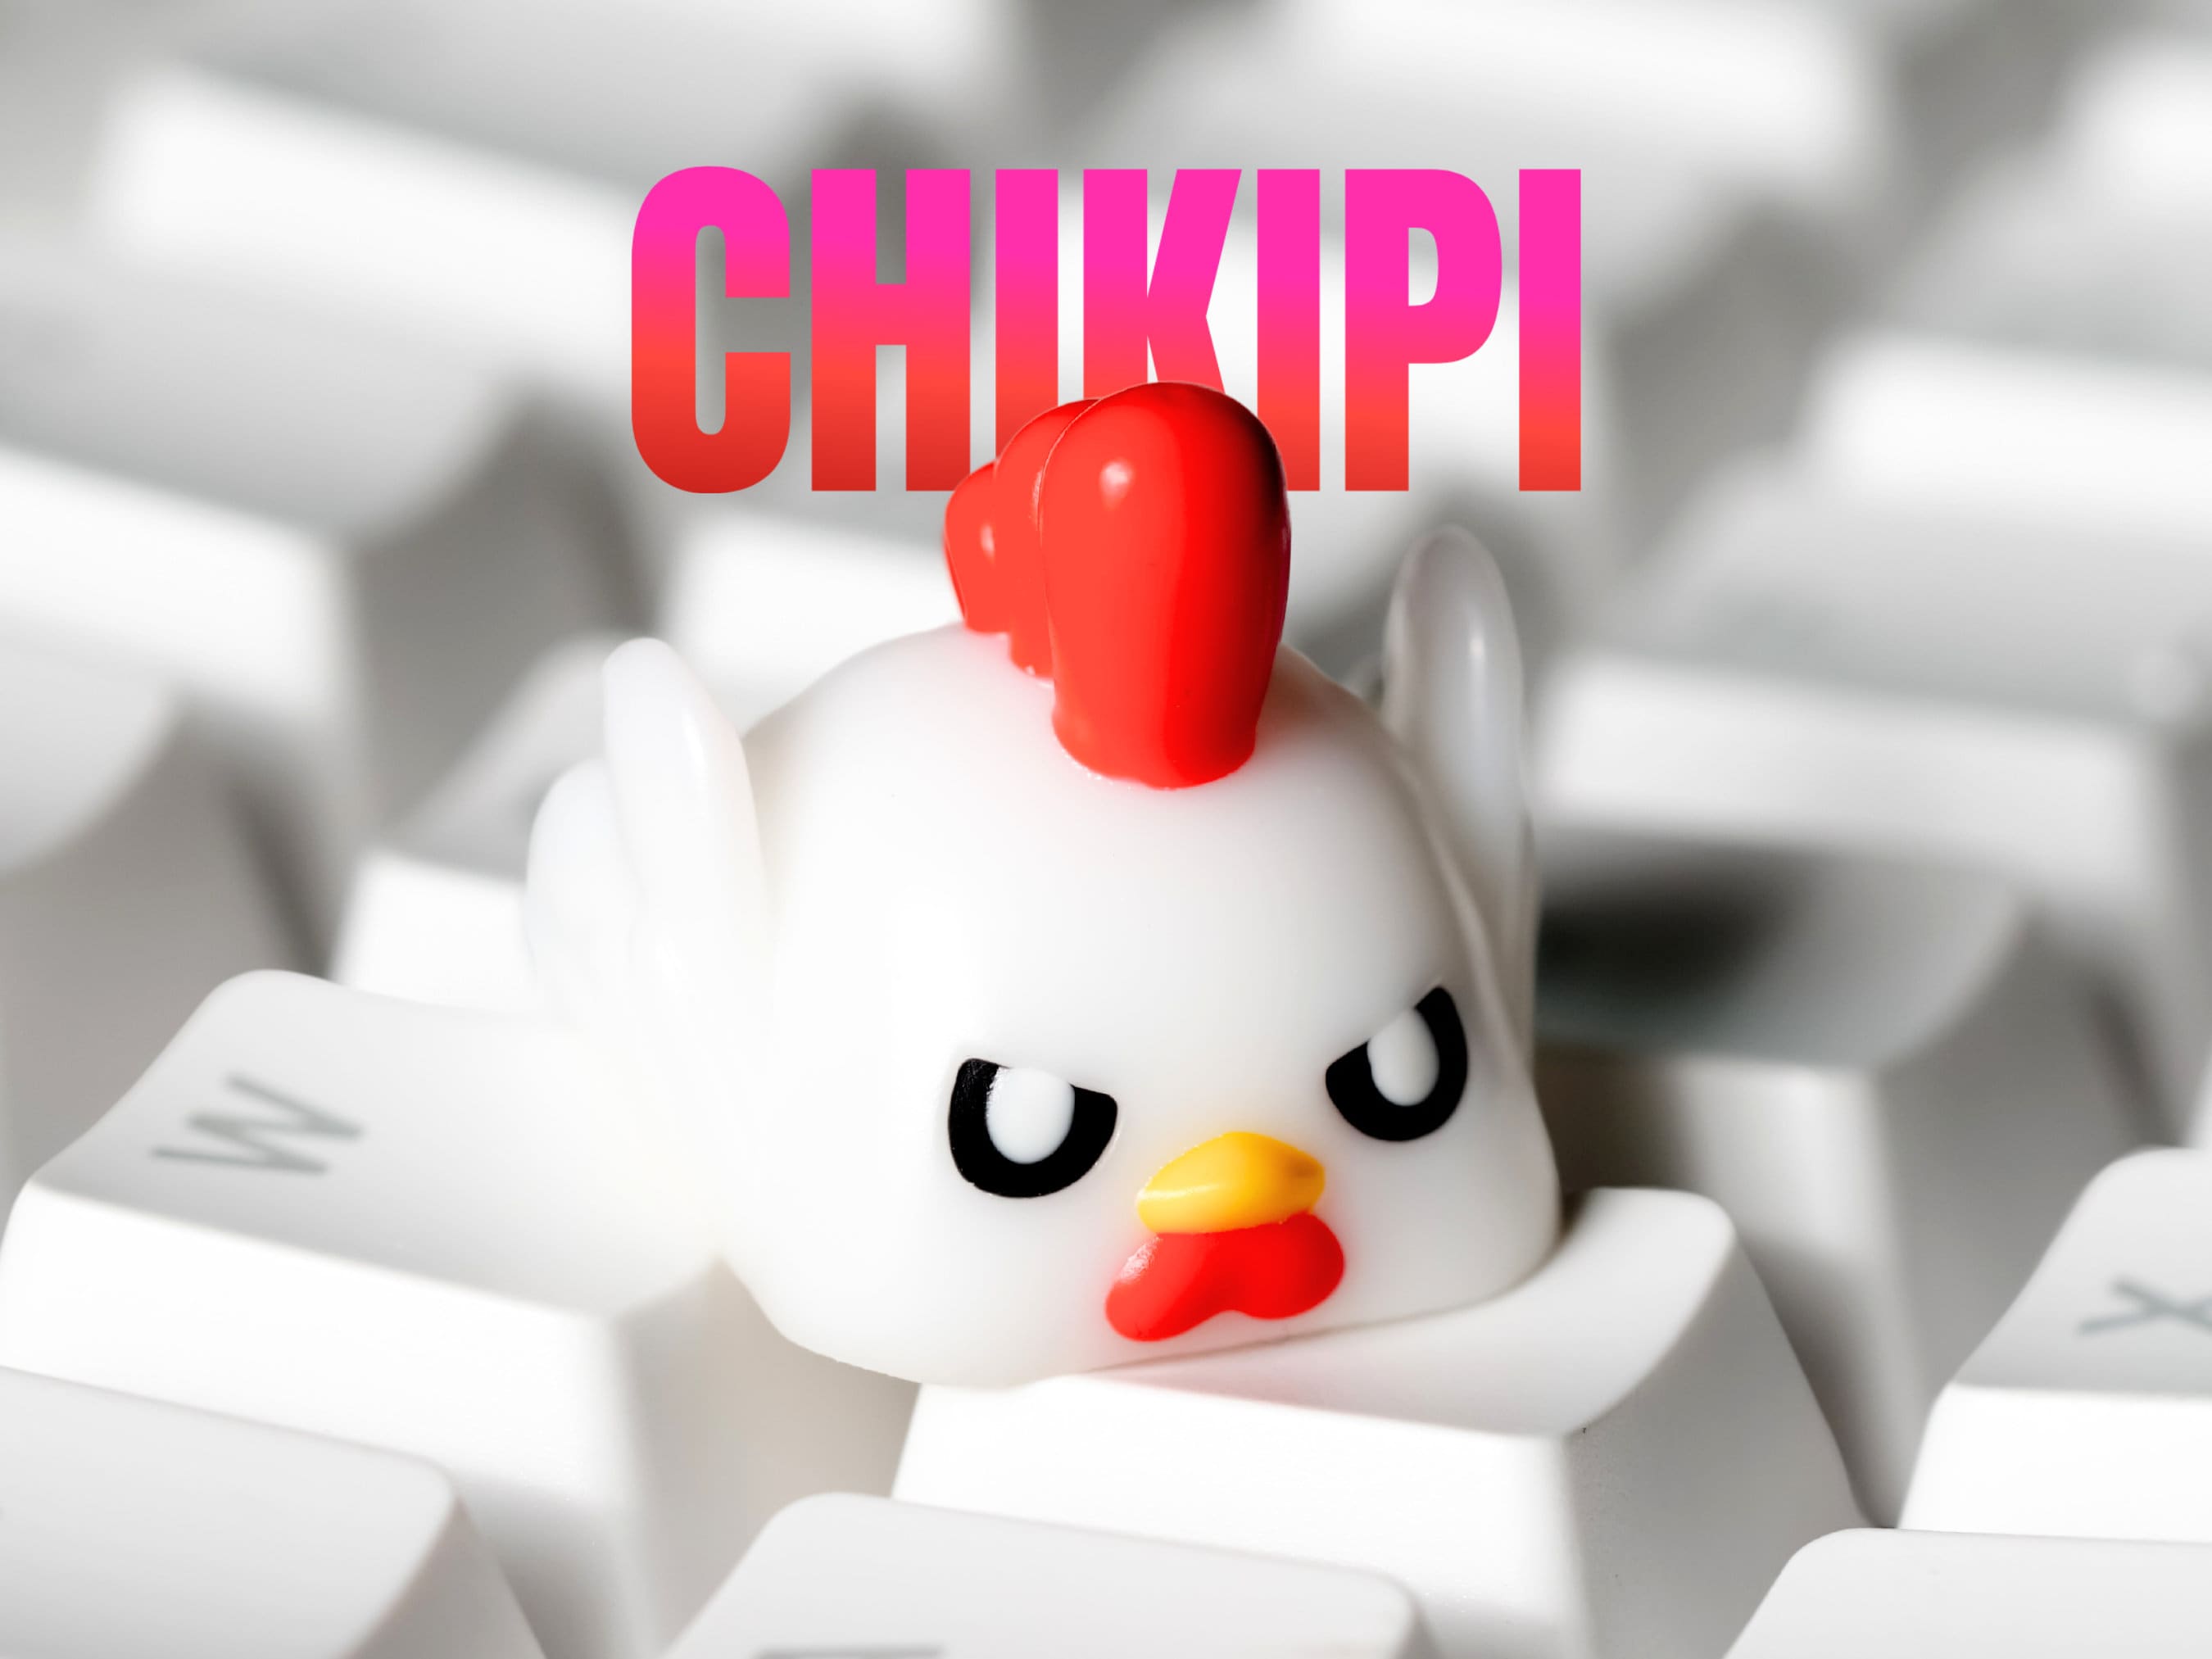 Chikipi Keycap, Palworld Keycap, Angry Chikipi, Gaming Keycap, Keycap for Cherry MX Switches Mechanical Keyboard, Gift for him